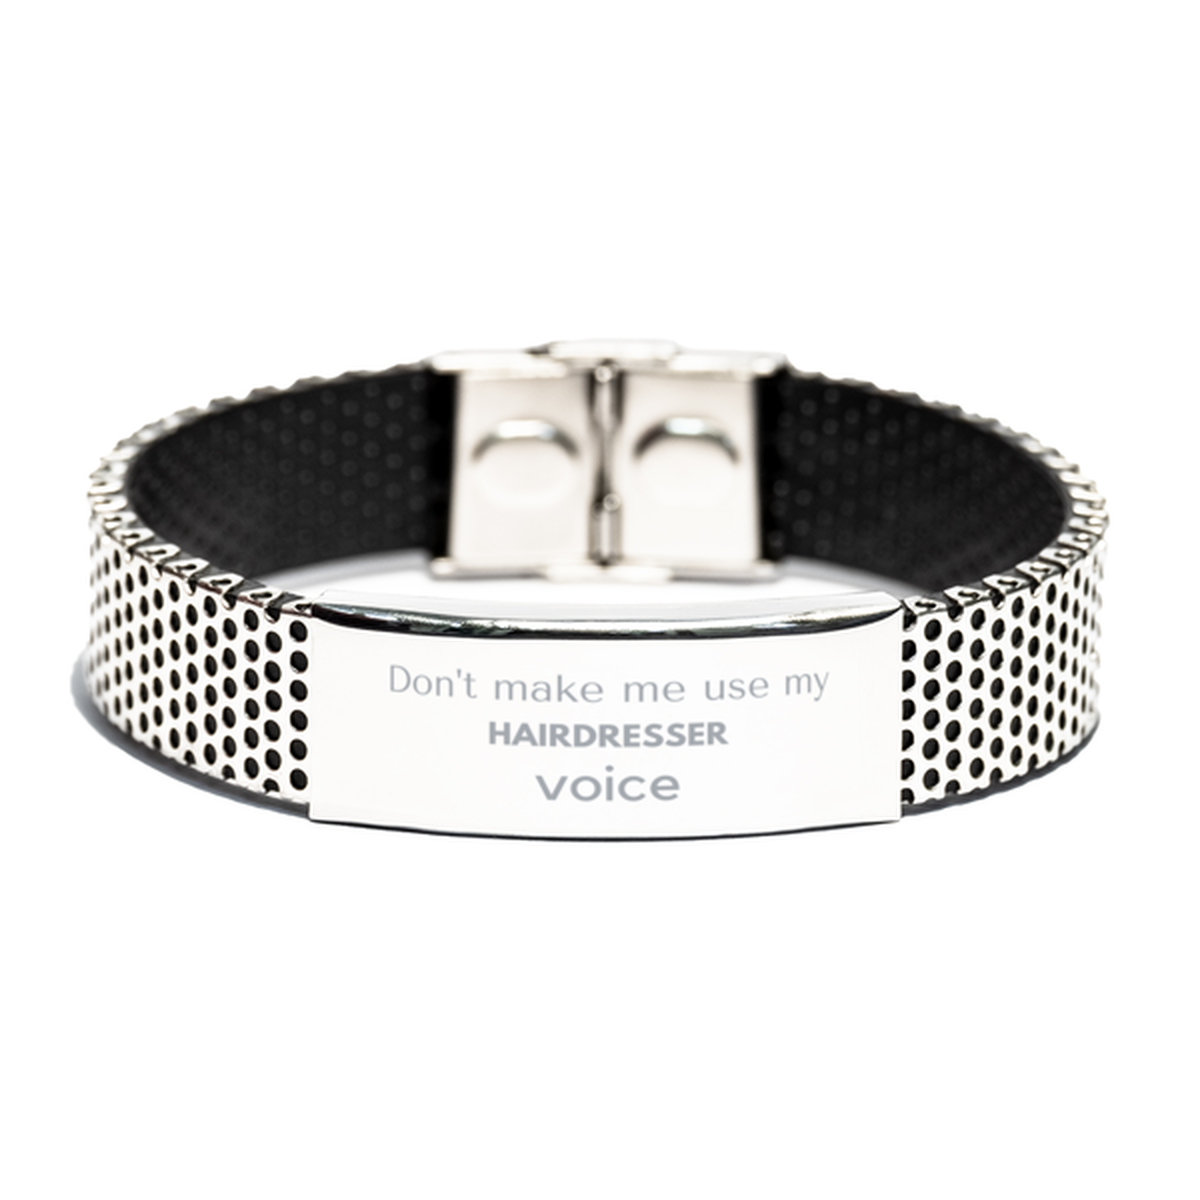 Don't make me use my Hairdresser voice, Sarcasm Hairdresser Gifts, Christmas Hairdresser Stainless Steel Bracelet Birthday Unique Gifts For Hairdresser Coworkers, Men, Women, Colleague, Friends